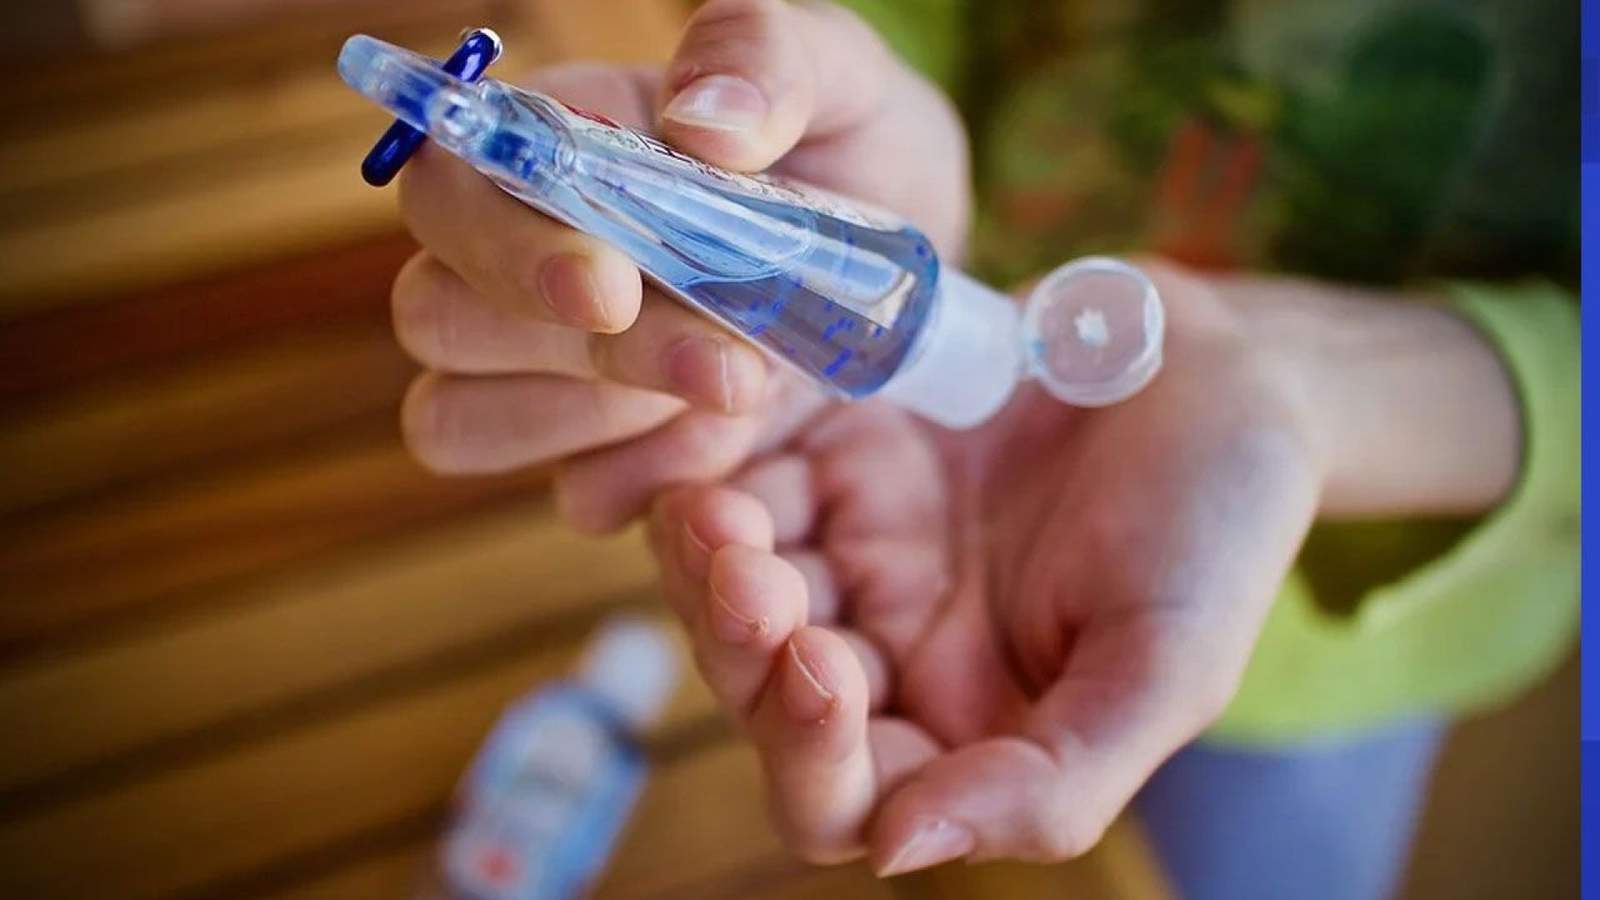 Don’t drink it: People are dying after drinking hand sanitizer, CDC says